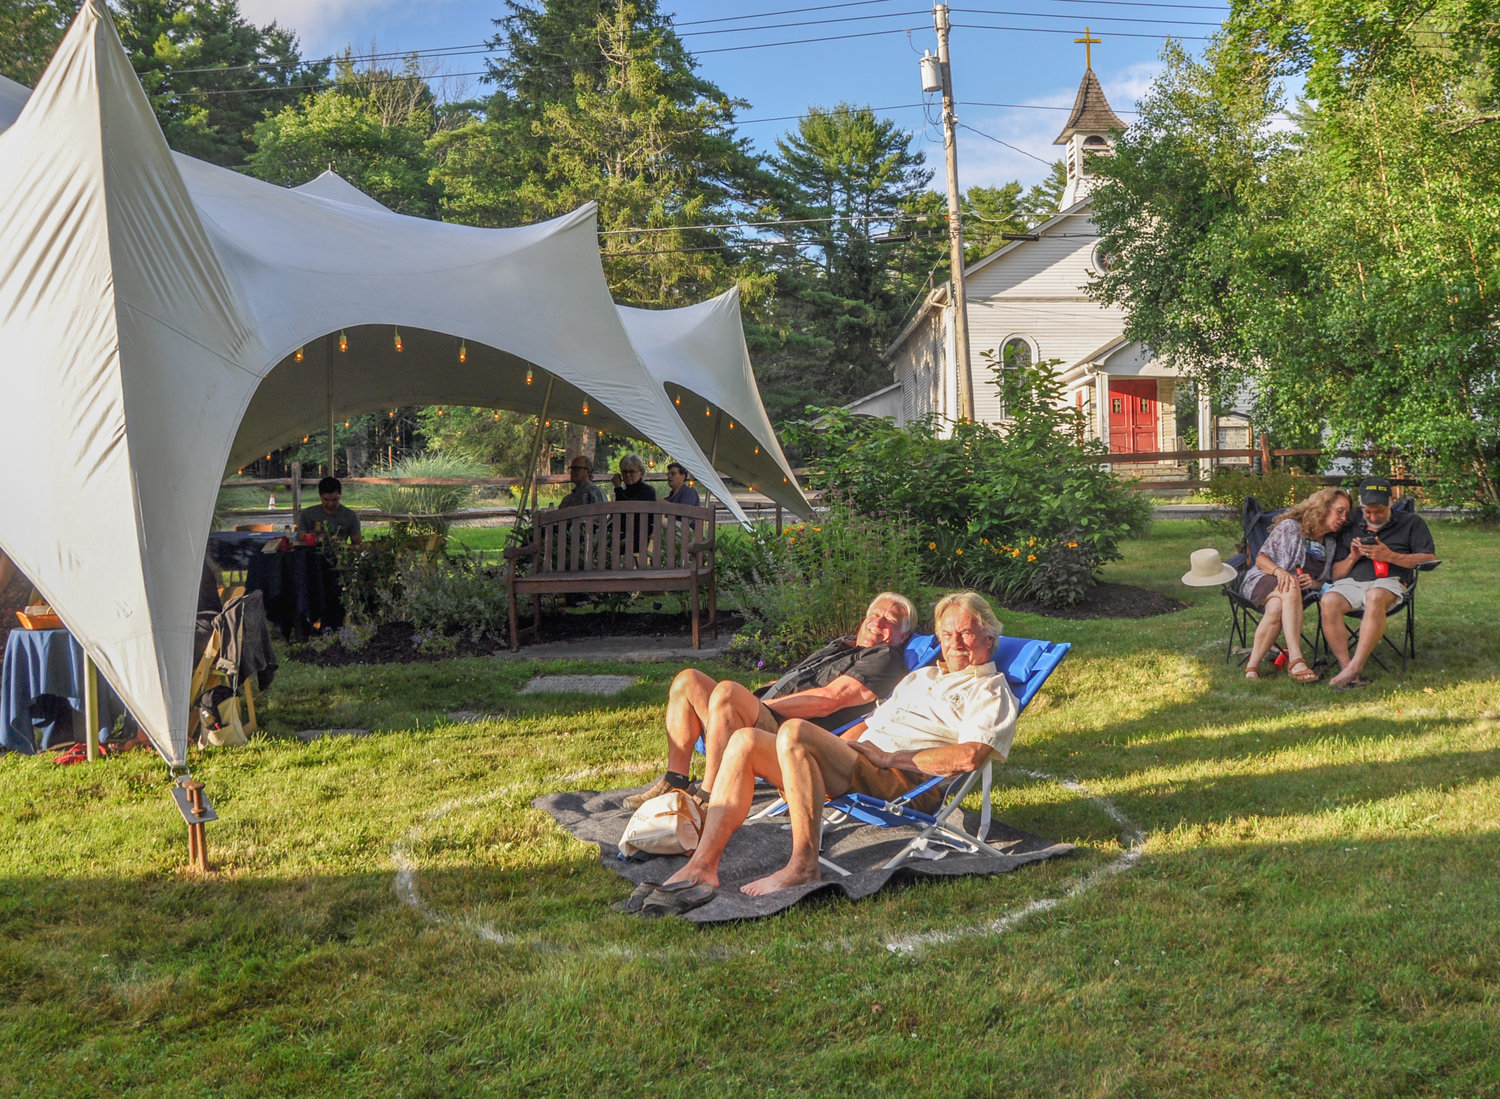 Safely distanced under tents and spaced apart in pairs or groups on the lawn, audience members were treated to a magical evening under the stars, serenaded by the truly gifted Nicholas Rodriguez in the garden of the Forestburgh Playhouse.